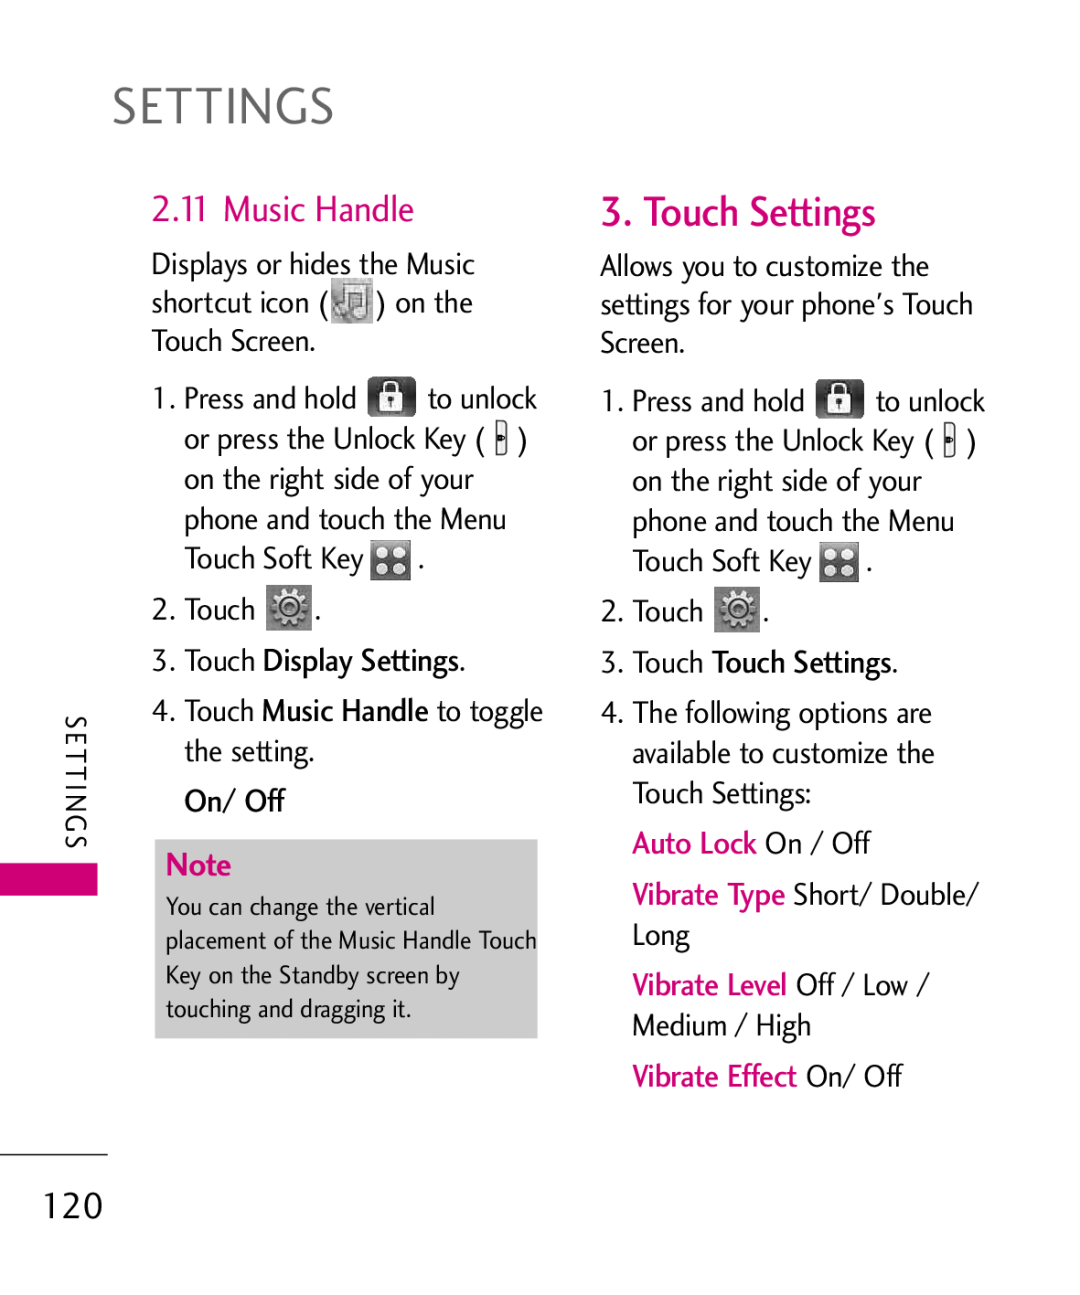 LG Electronics MMBB0379501 Touch Display Settings, On/ Off, Touch Touch Settings, Auto Lock On / Off, Press and hold 